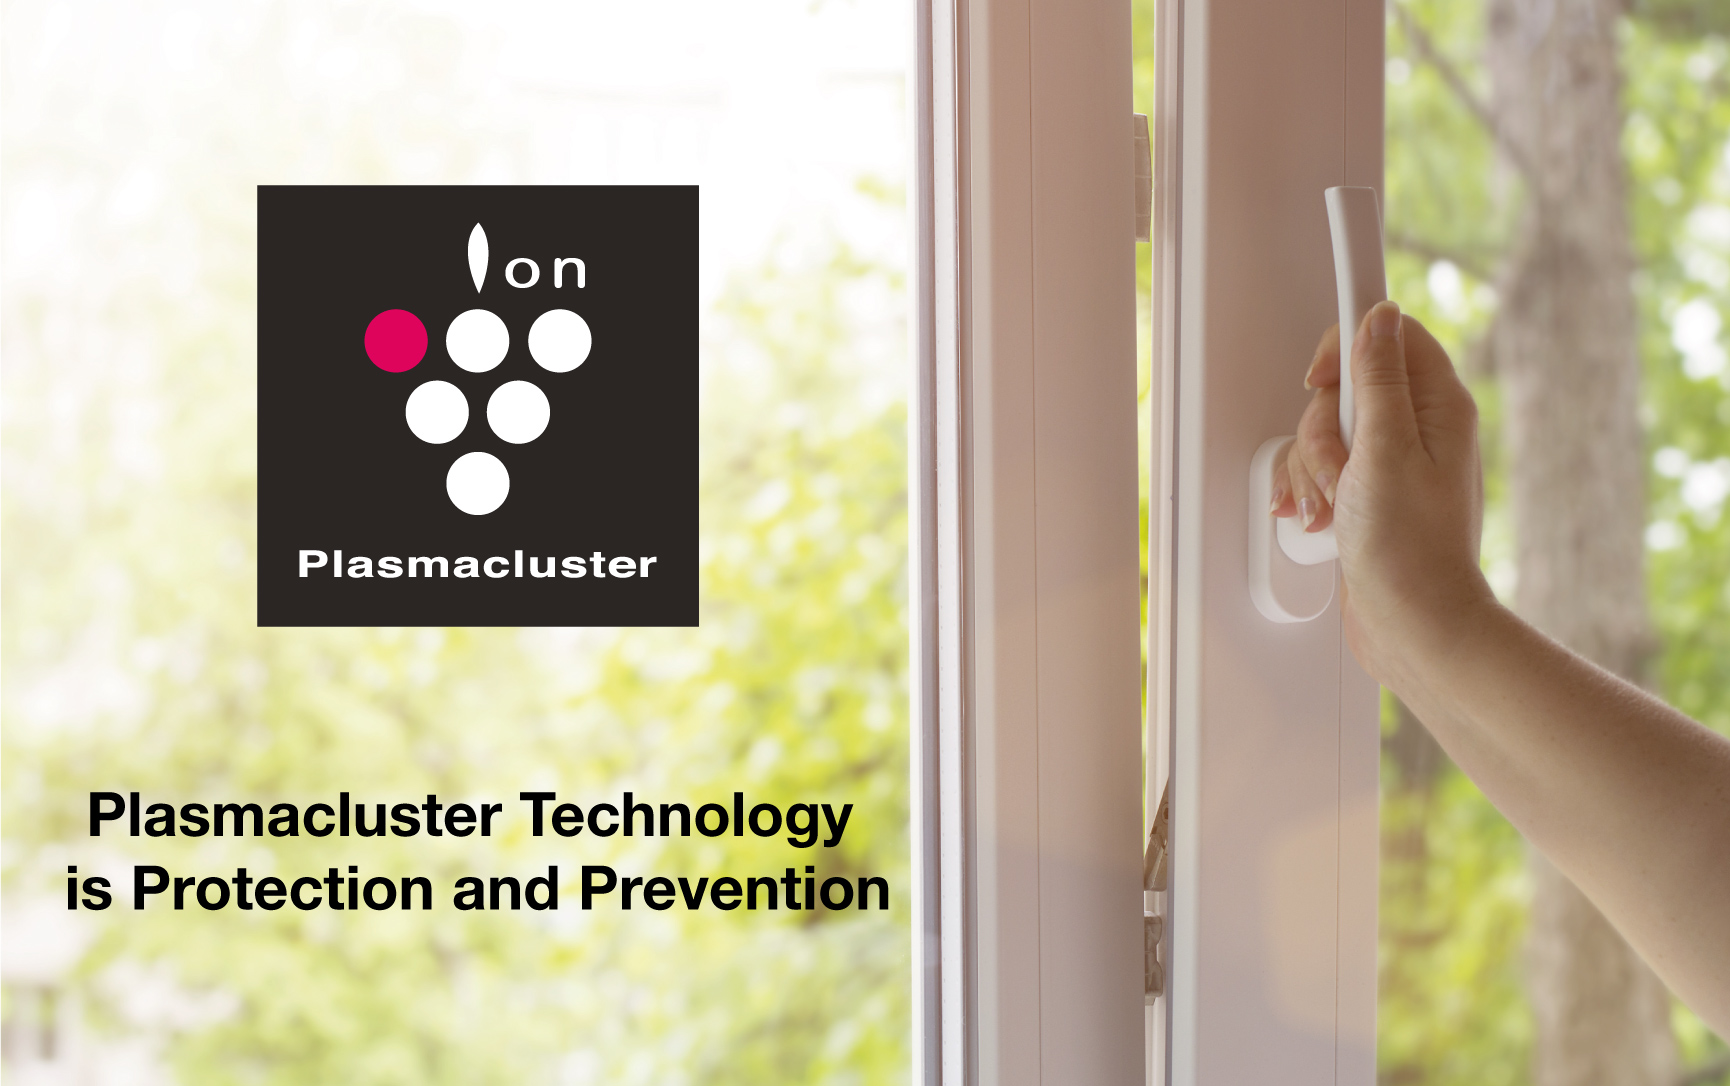 Plasmacluster Technology is Protection and Prevention